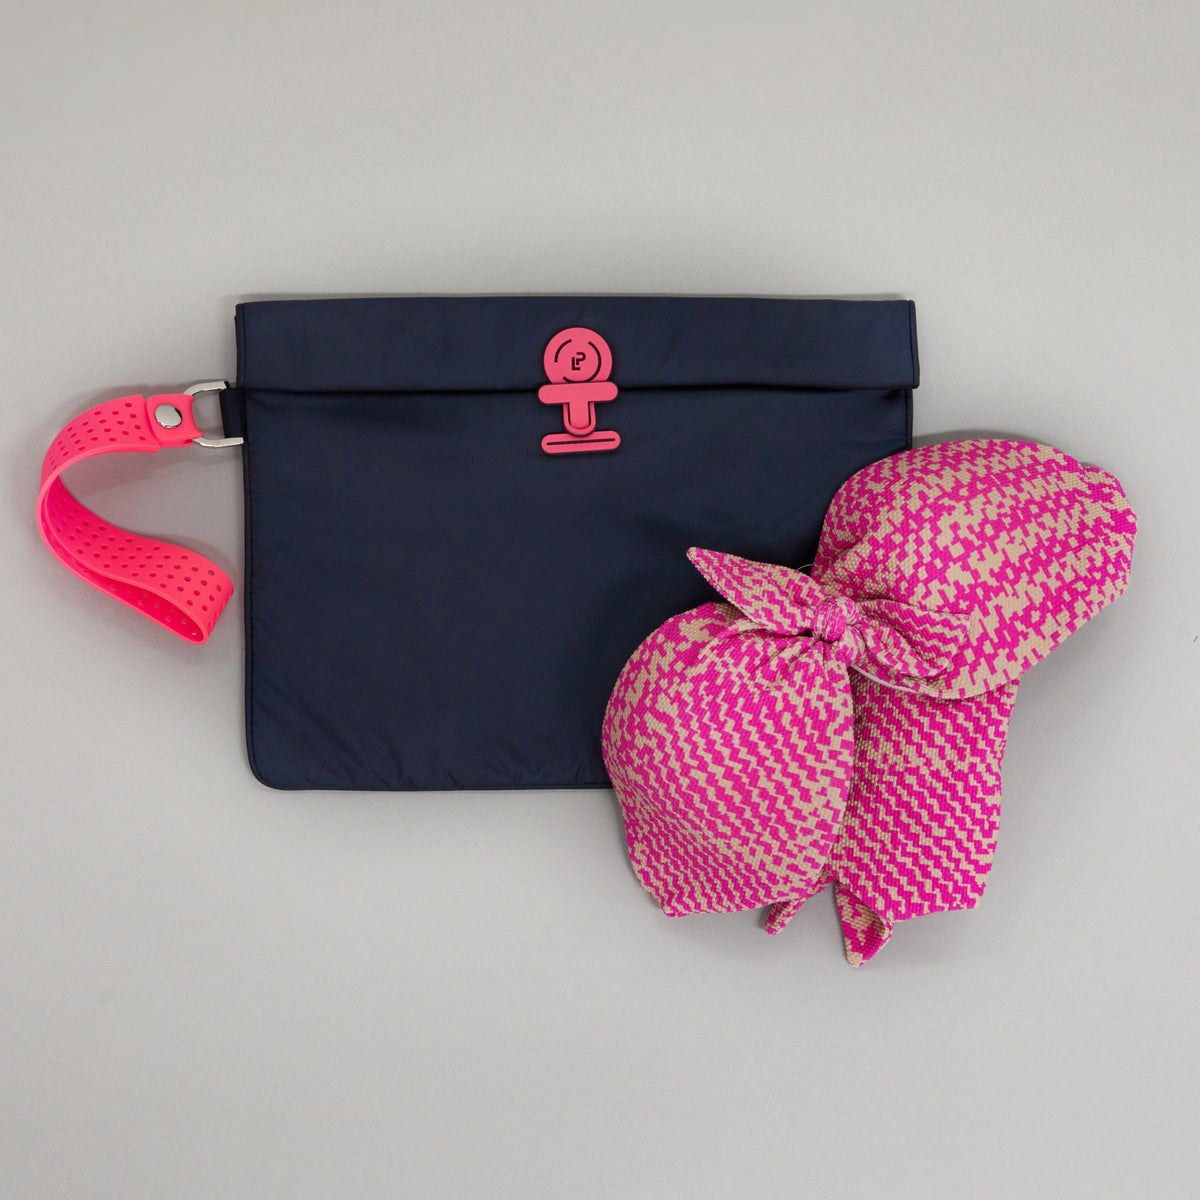 Small Wet Bag in Midnight Neon Pink colourway shown flat with a bikini placed on top